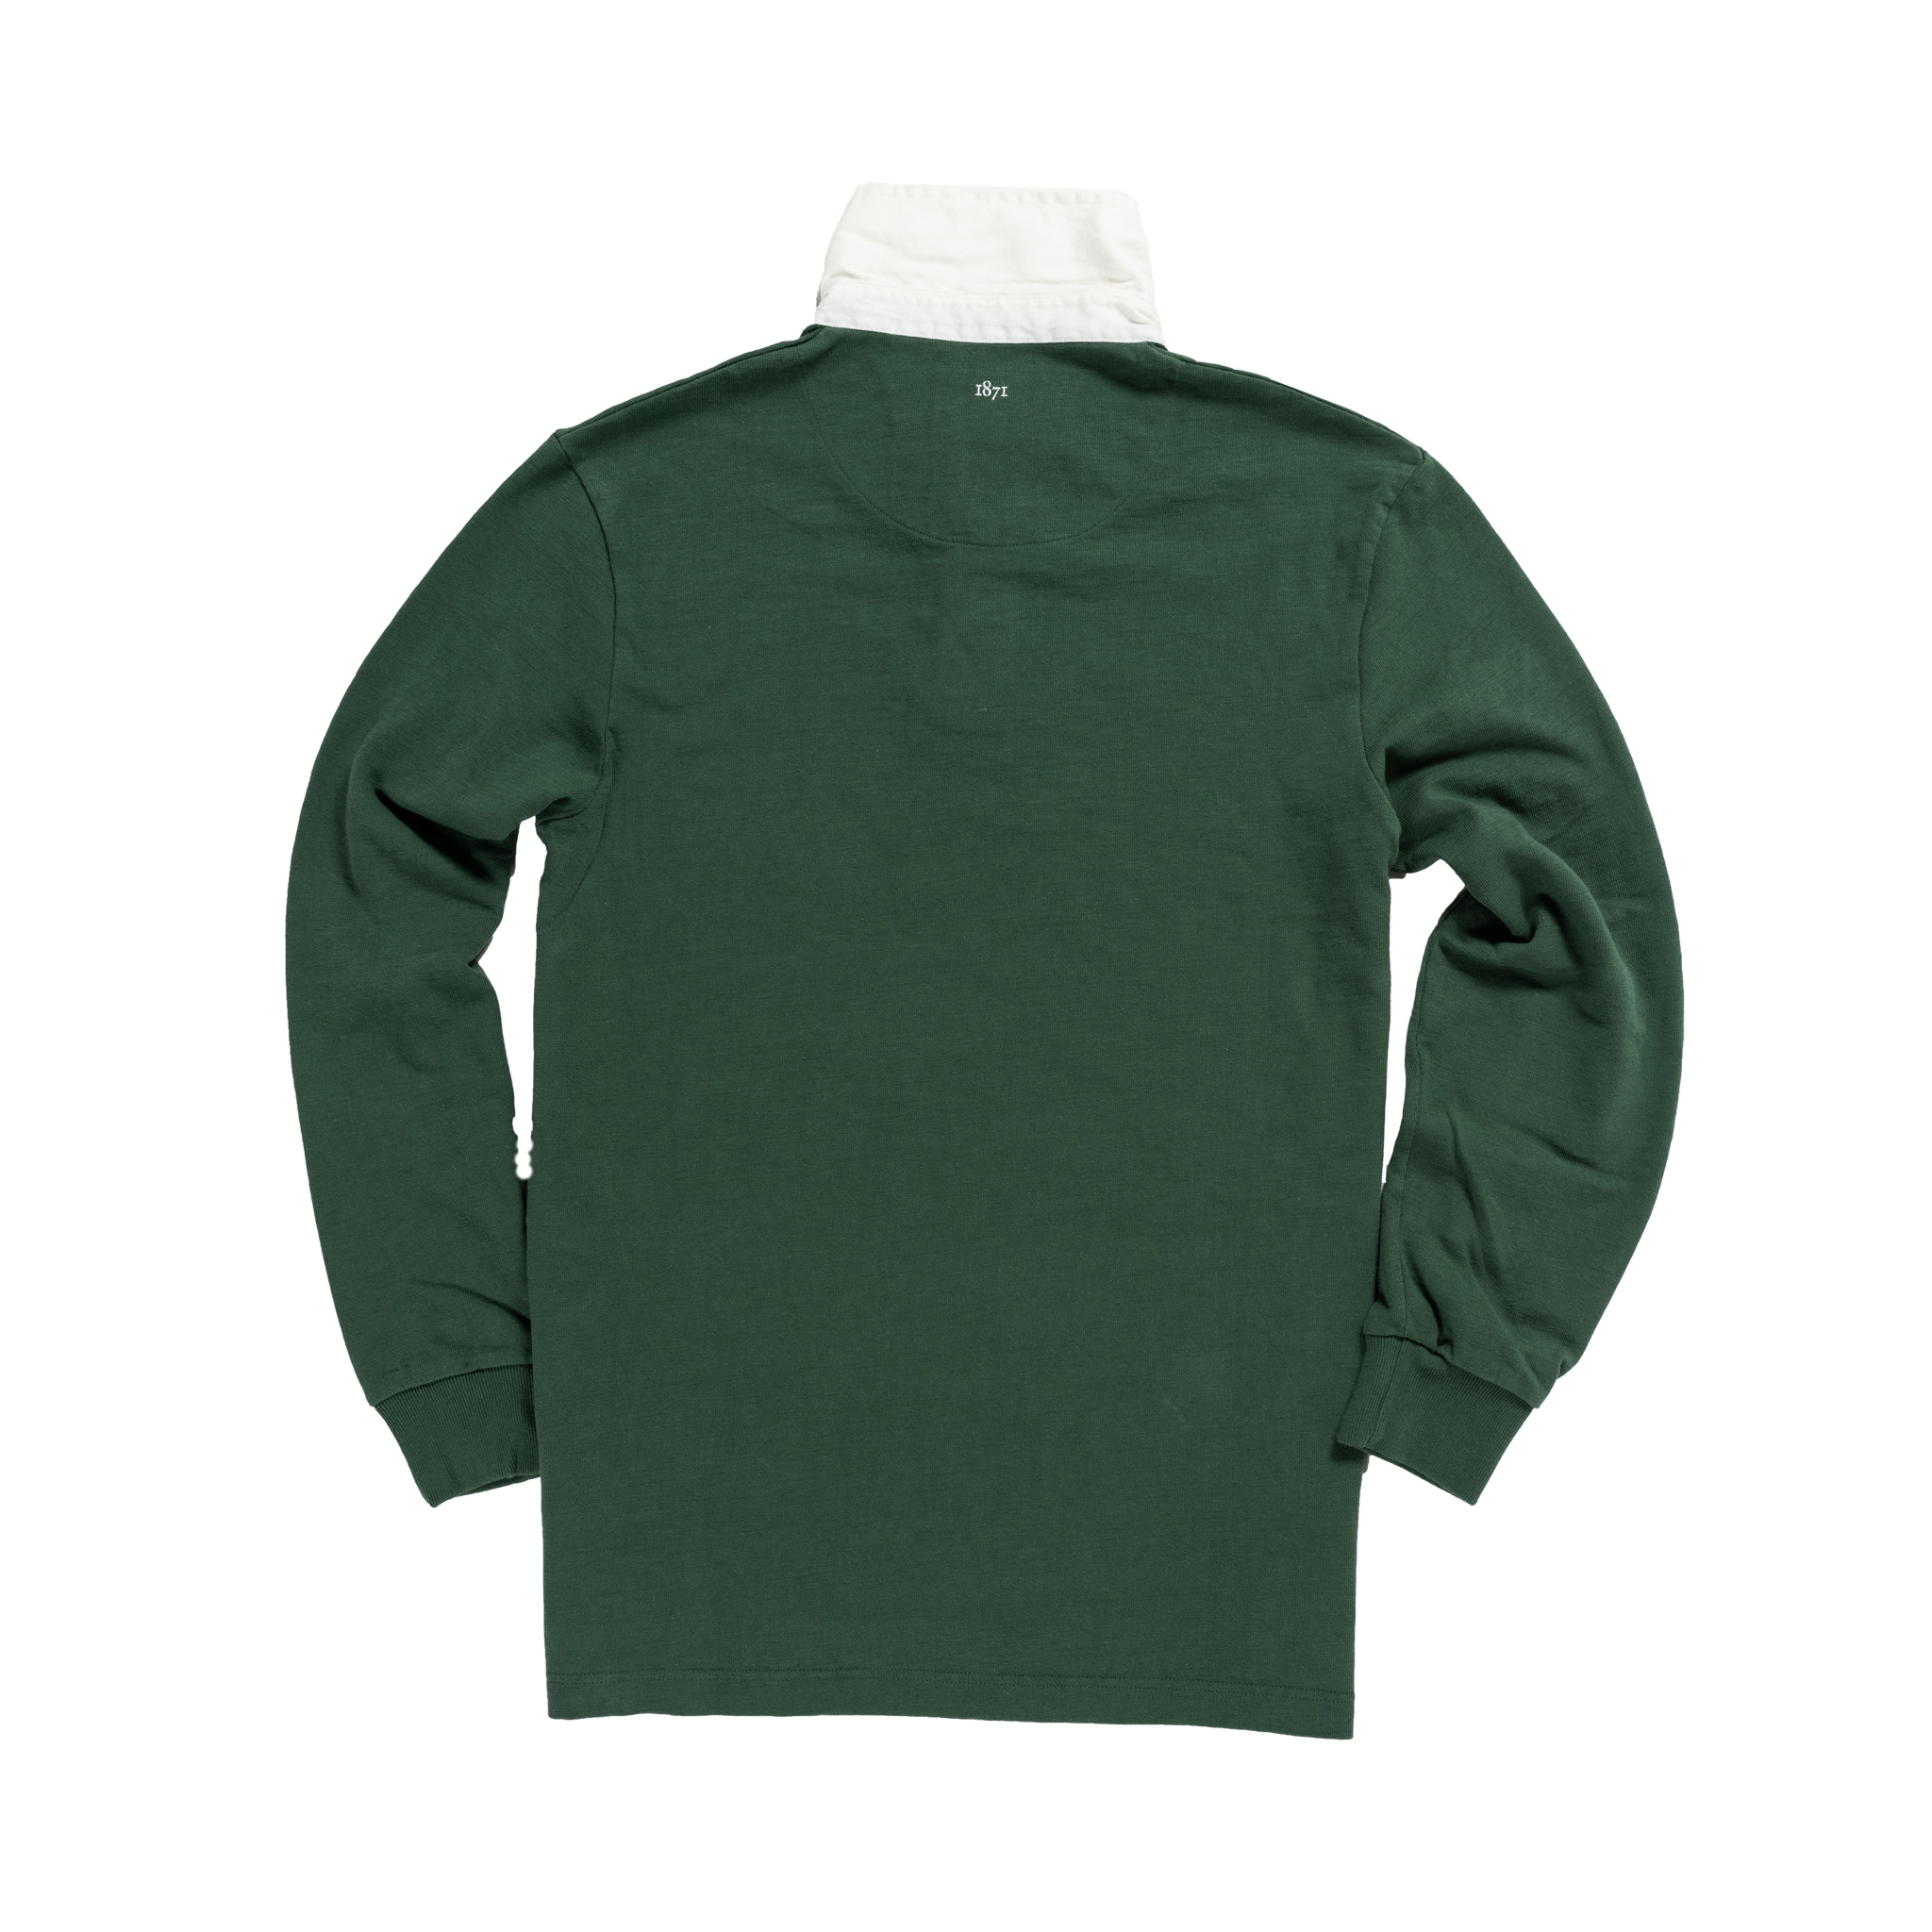 Classic Green 1871 Vintage Rugby Shirt